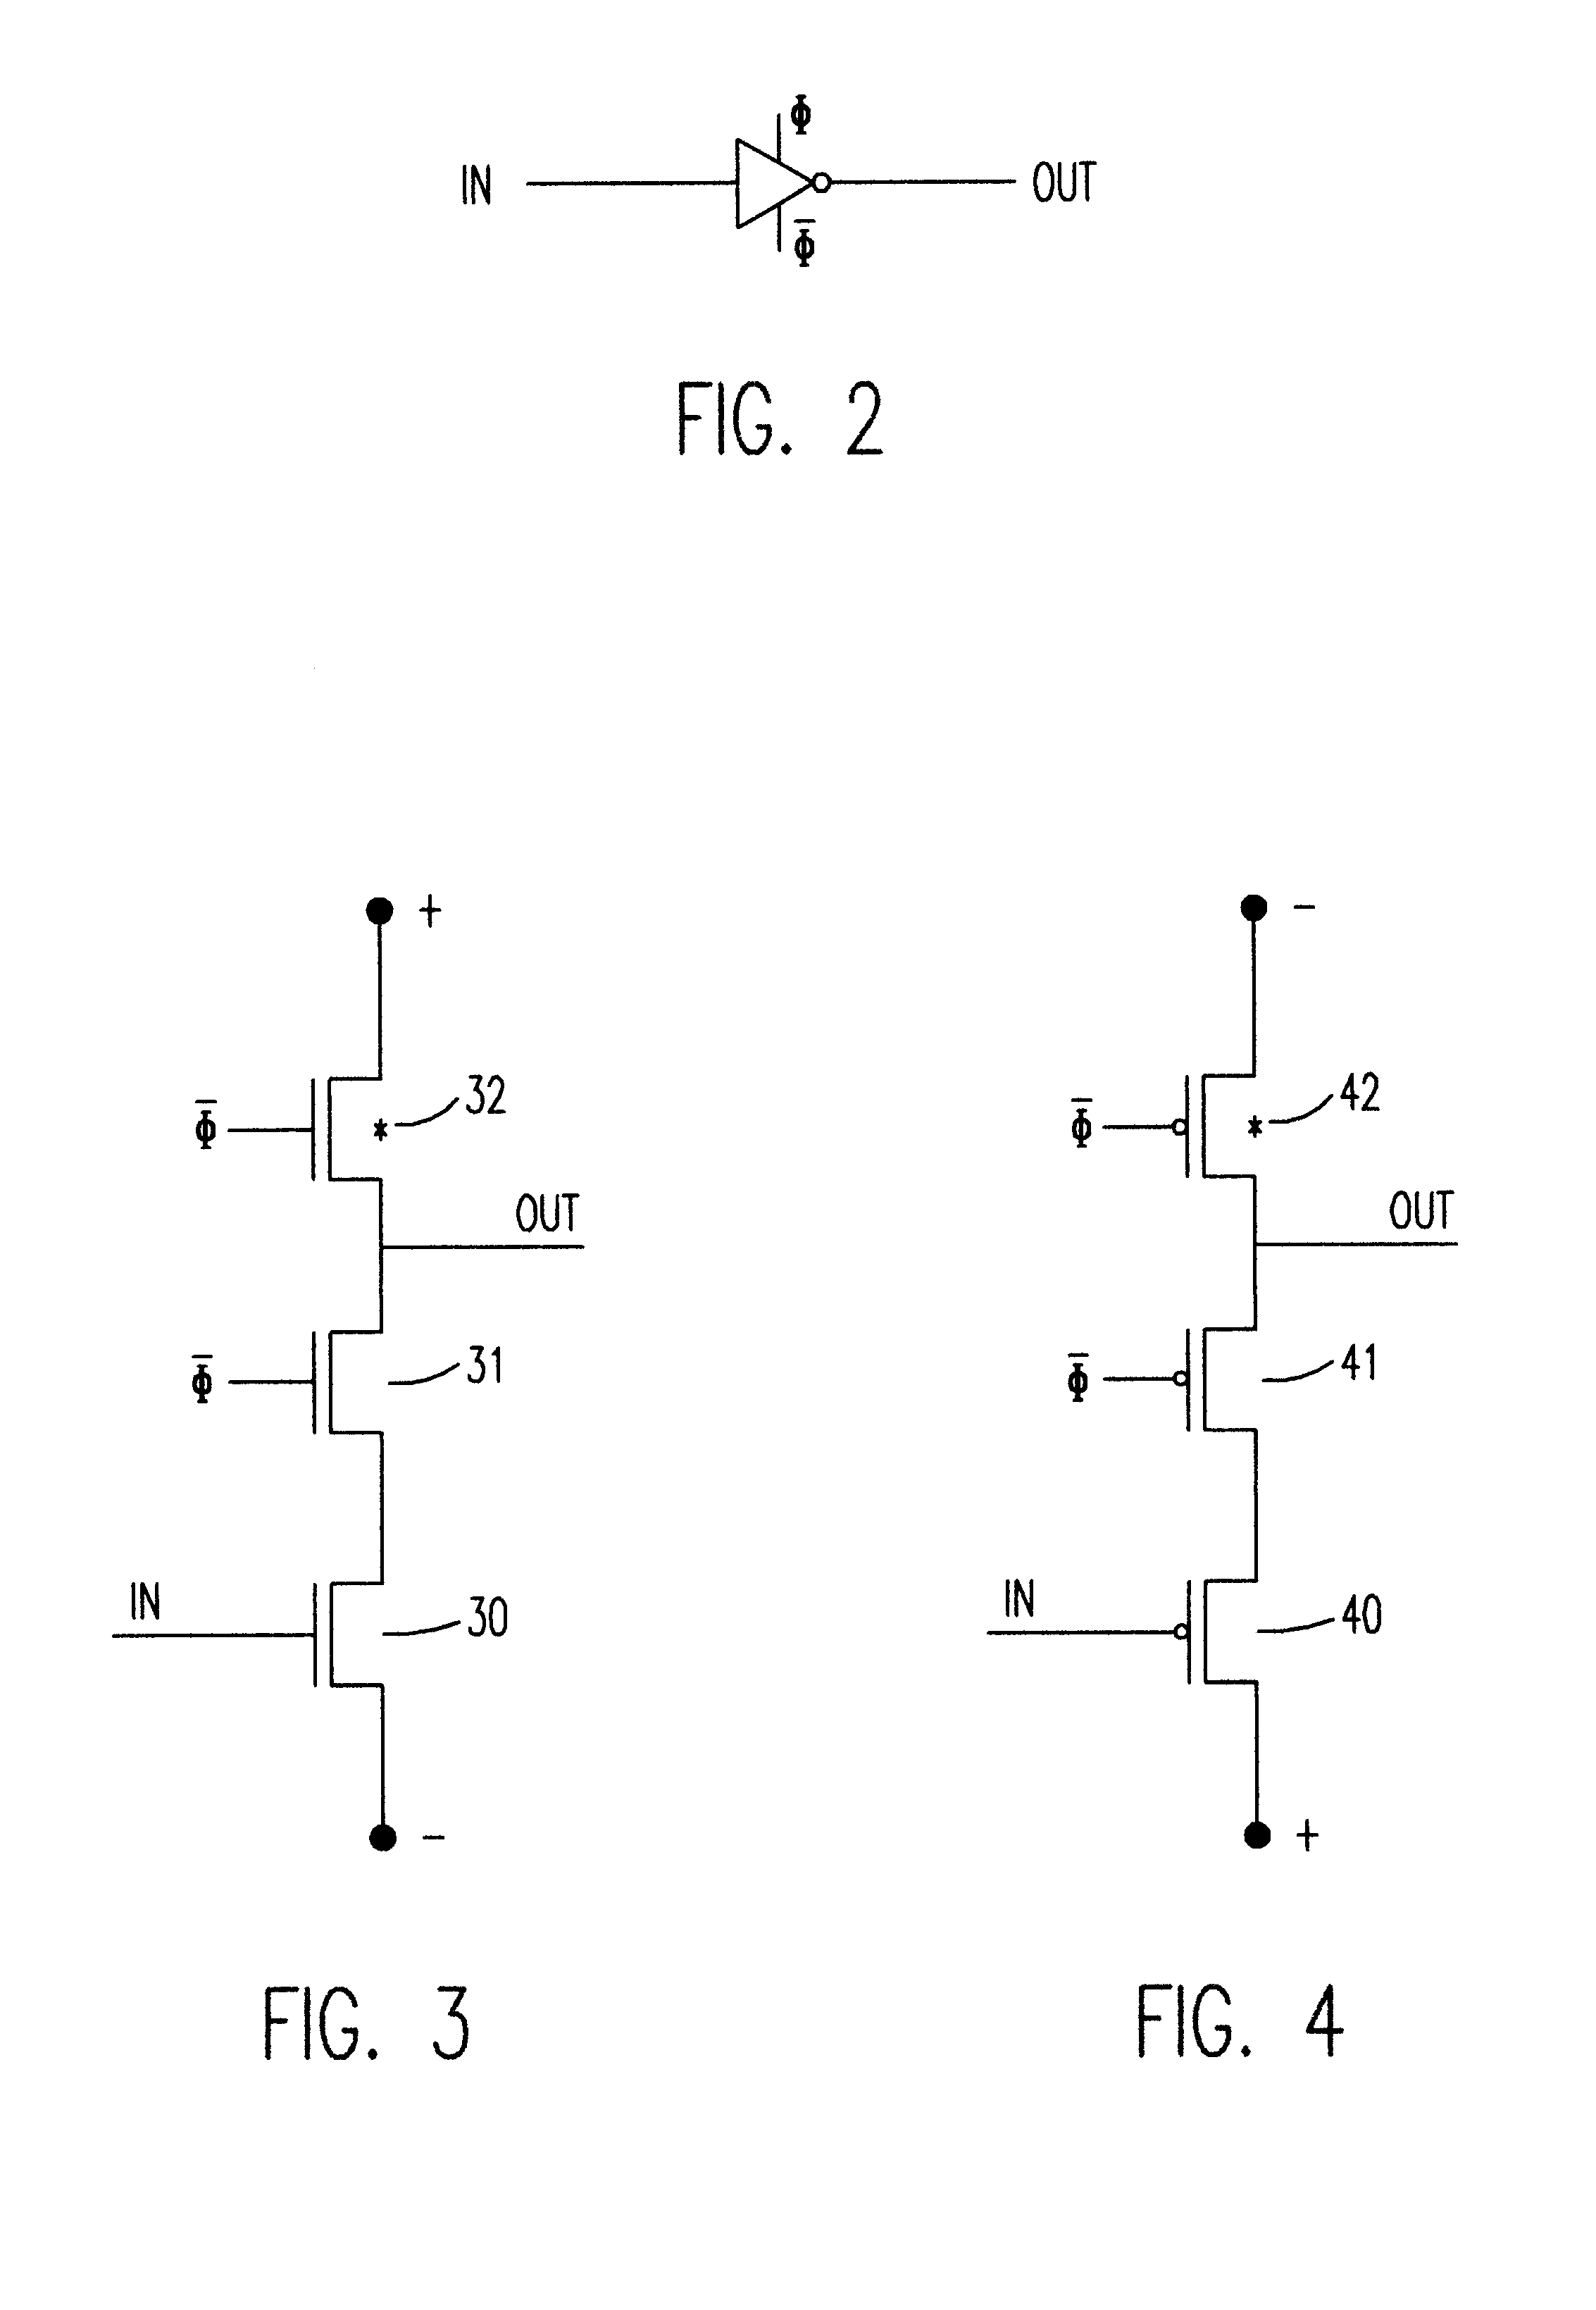 Reduced-transistor, double-edged-triggered, static flip flop